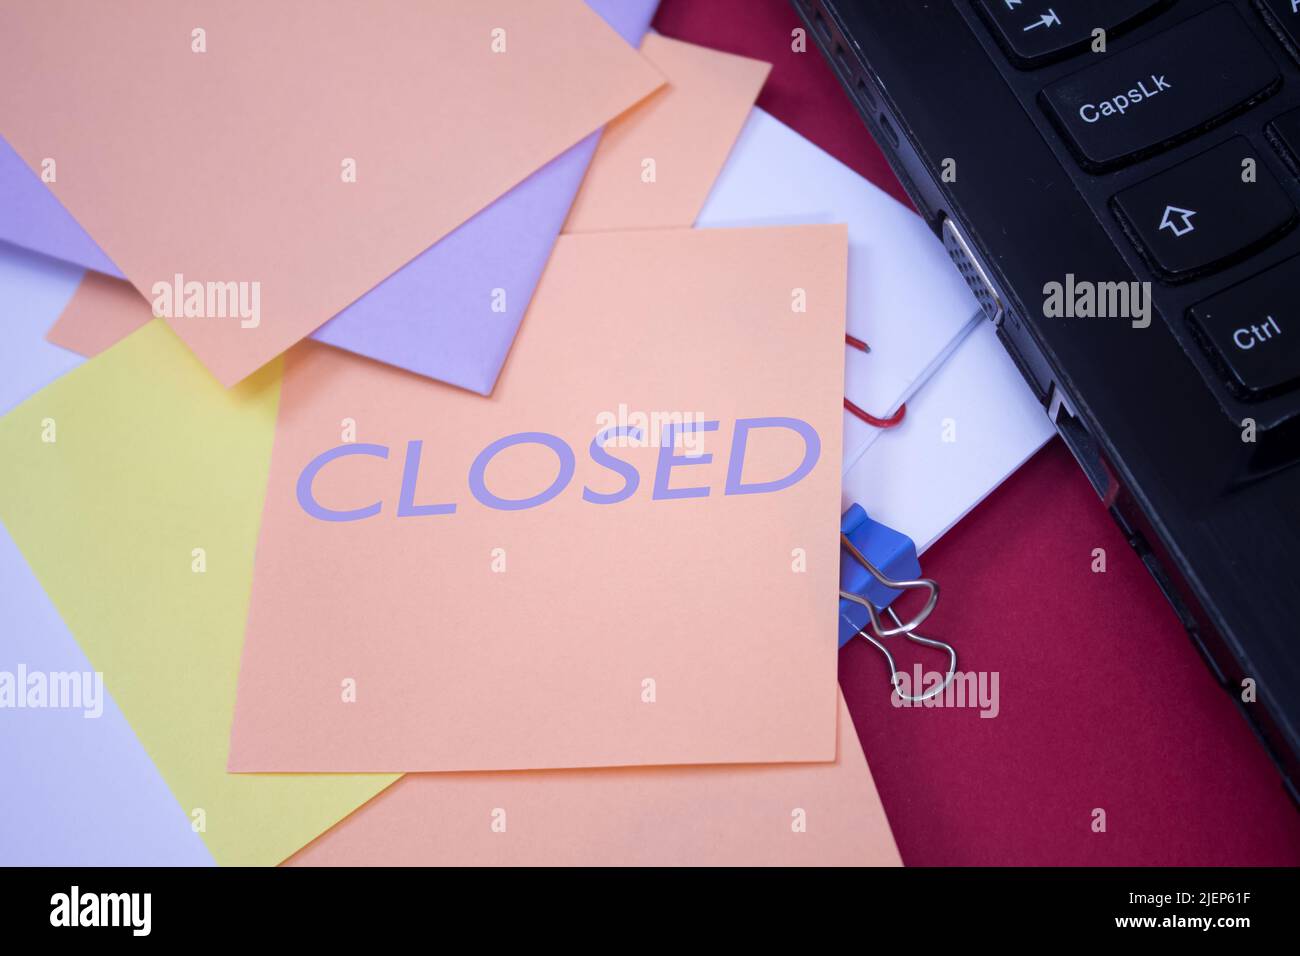 Closed. Text on adhesive note paper. Event, celebration reminder message. Stock Photo